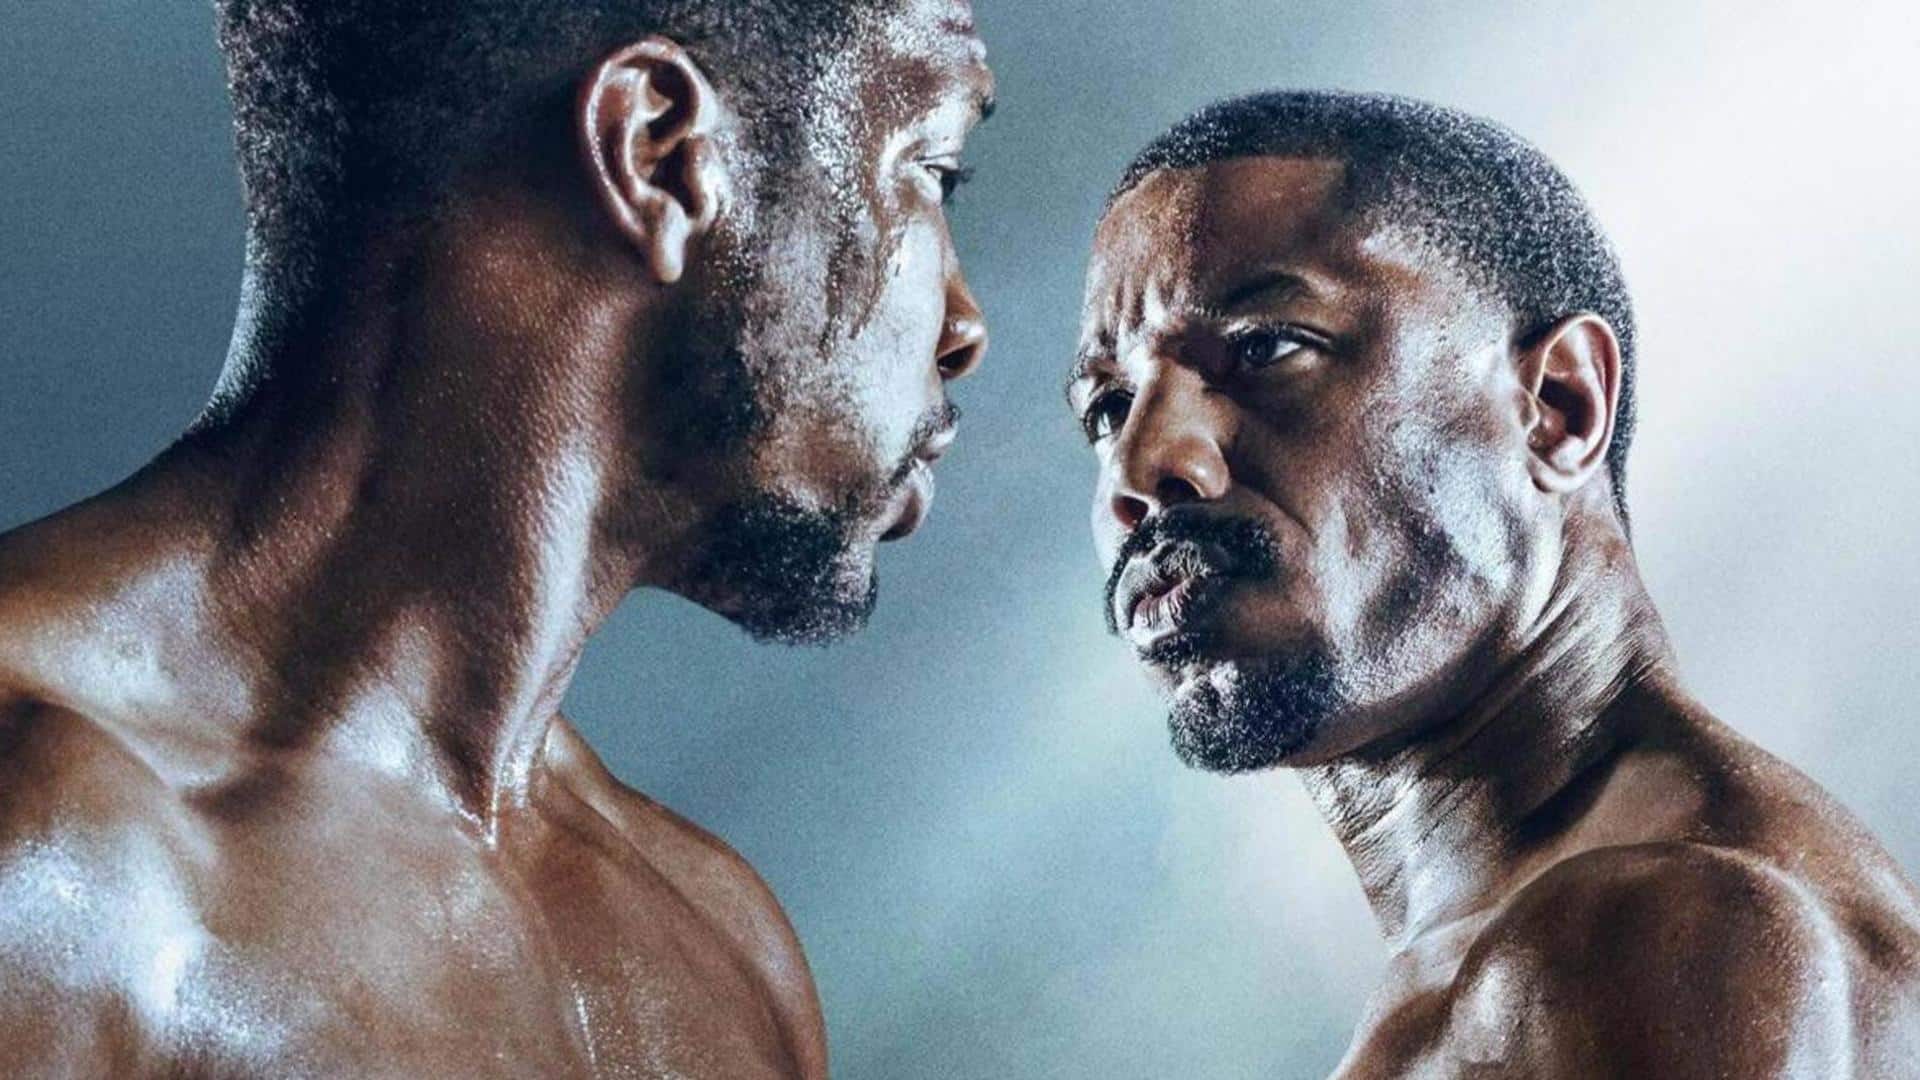 'Creed III' streaming on OTT for Prime subscribers now